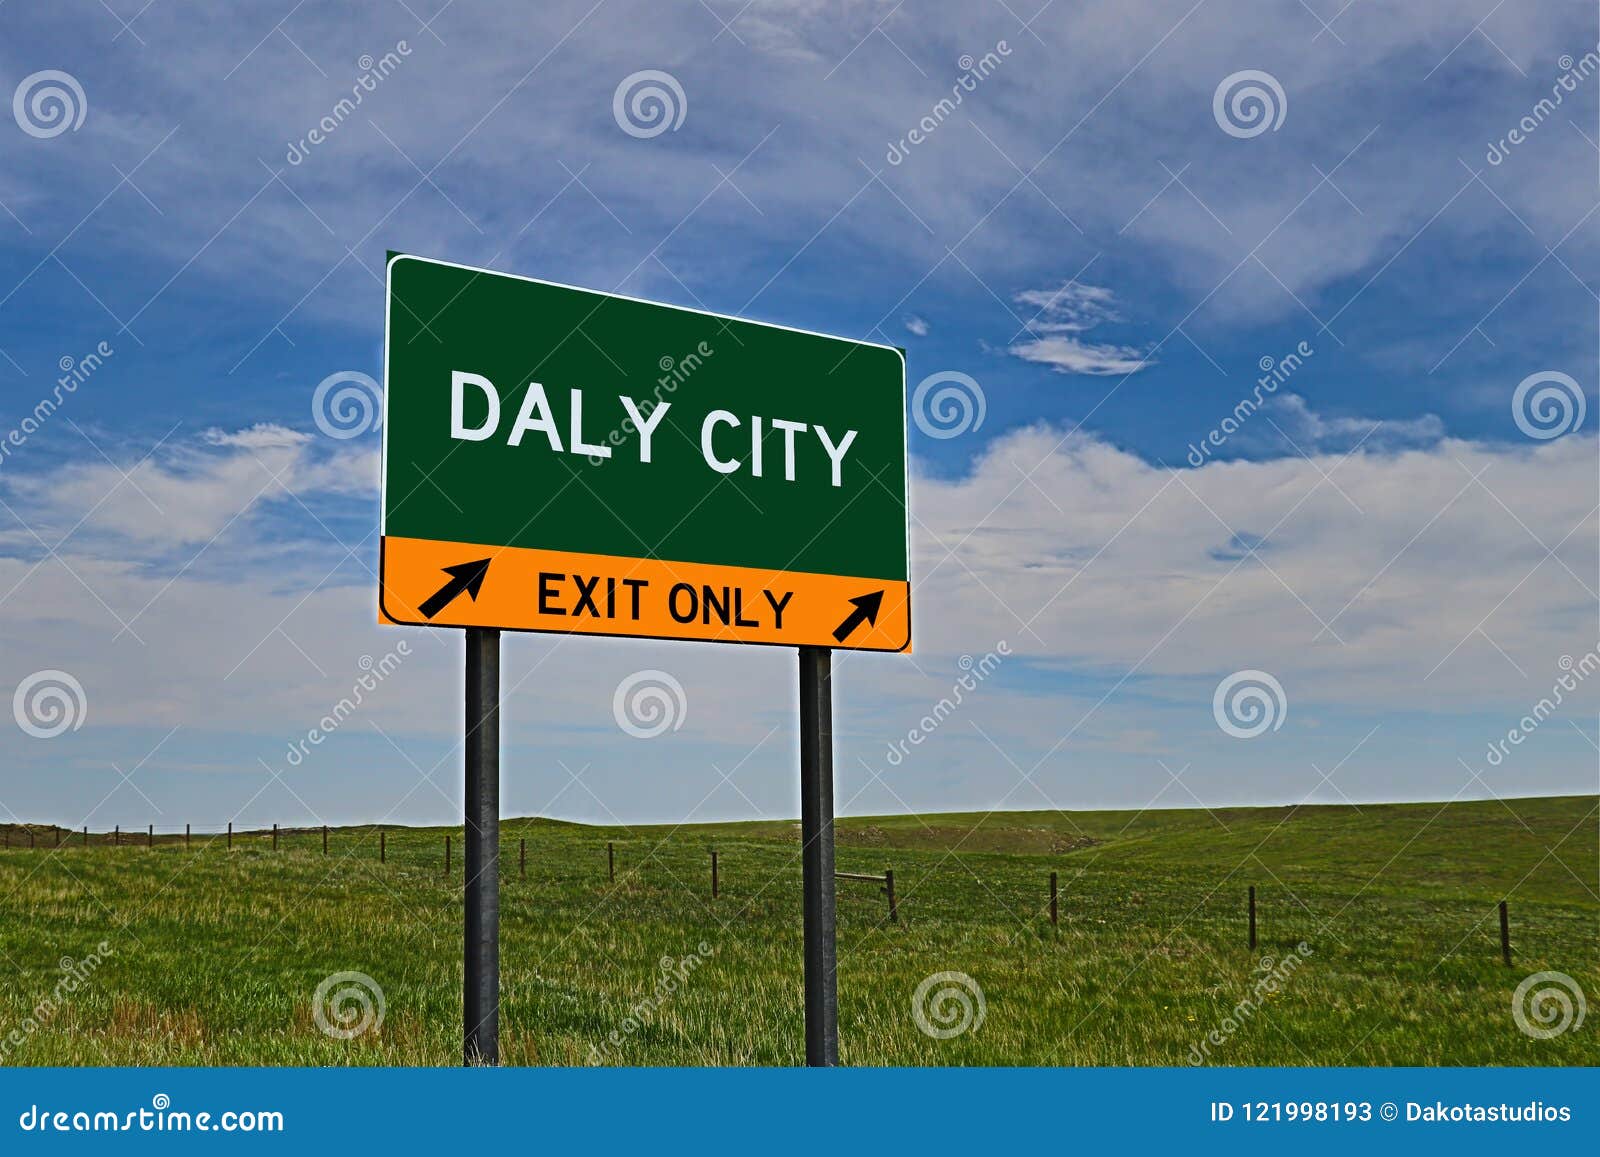 us highway exit sign for daly city